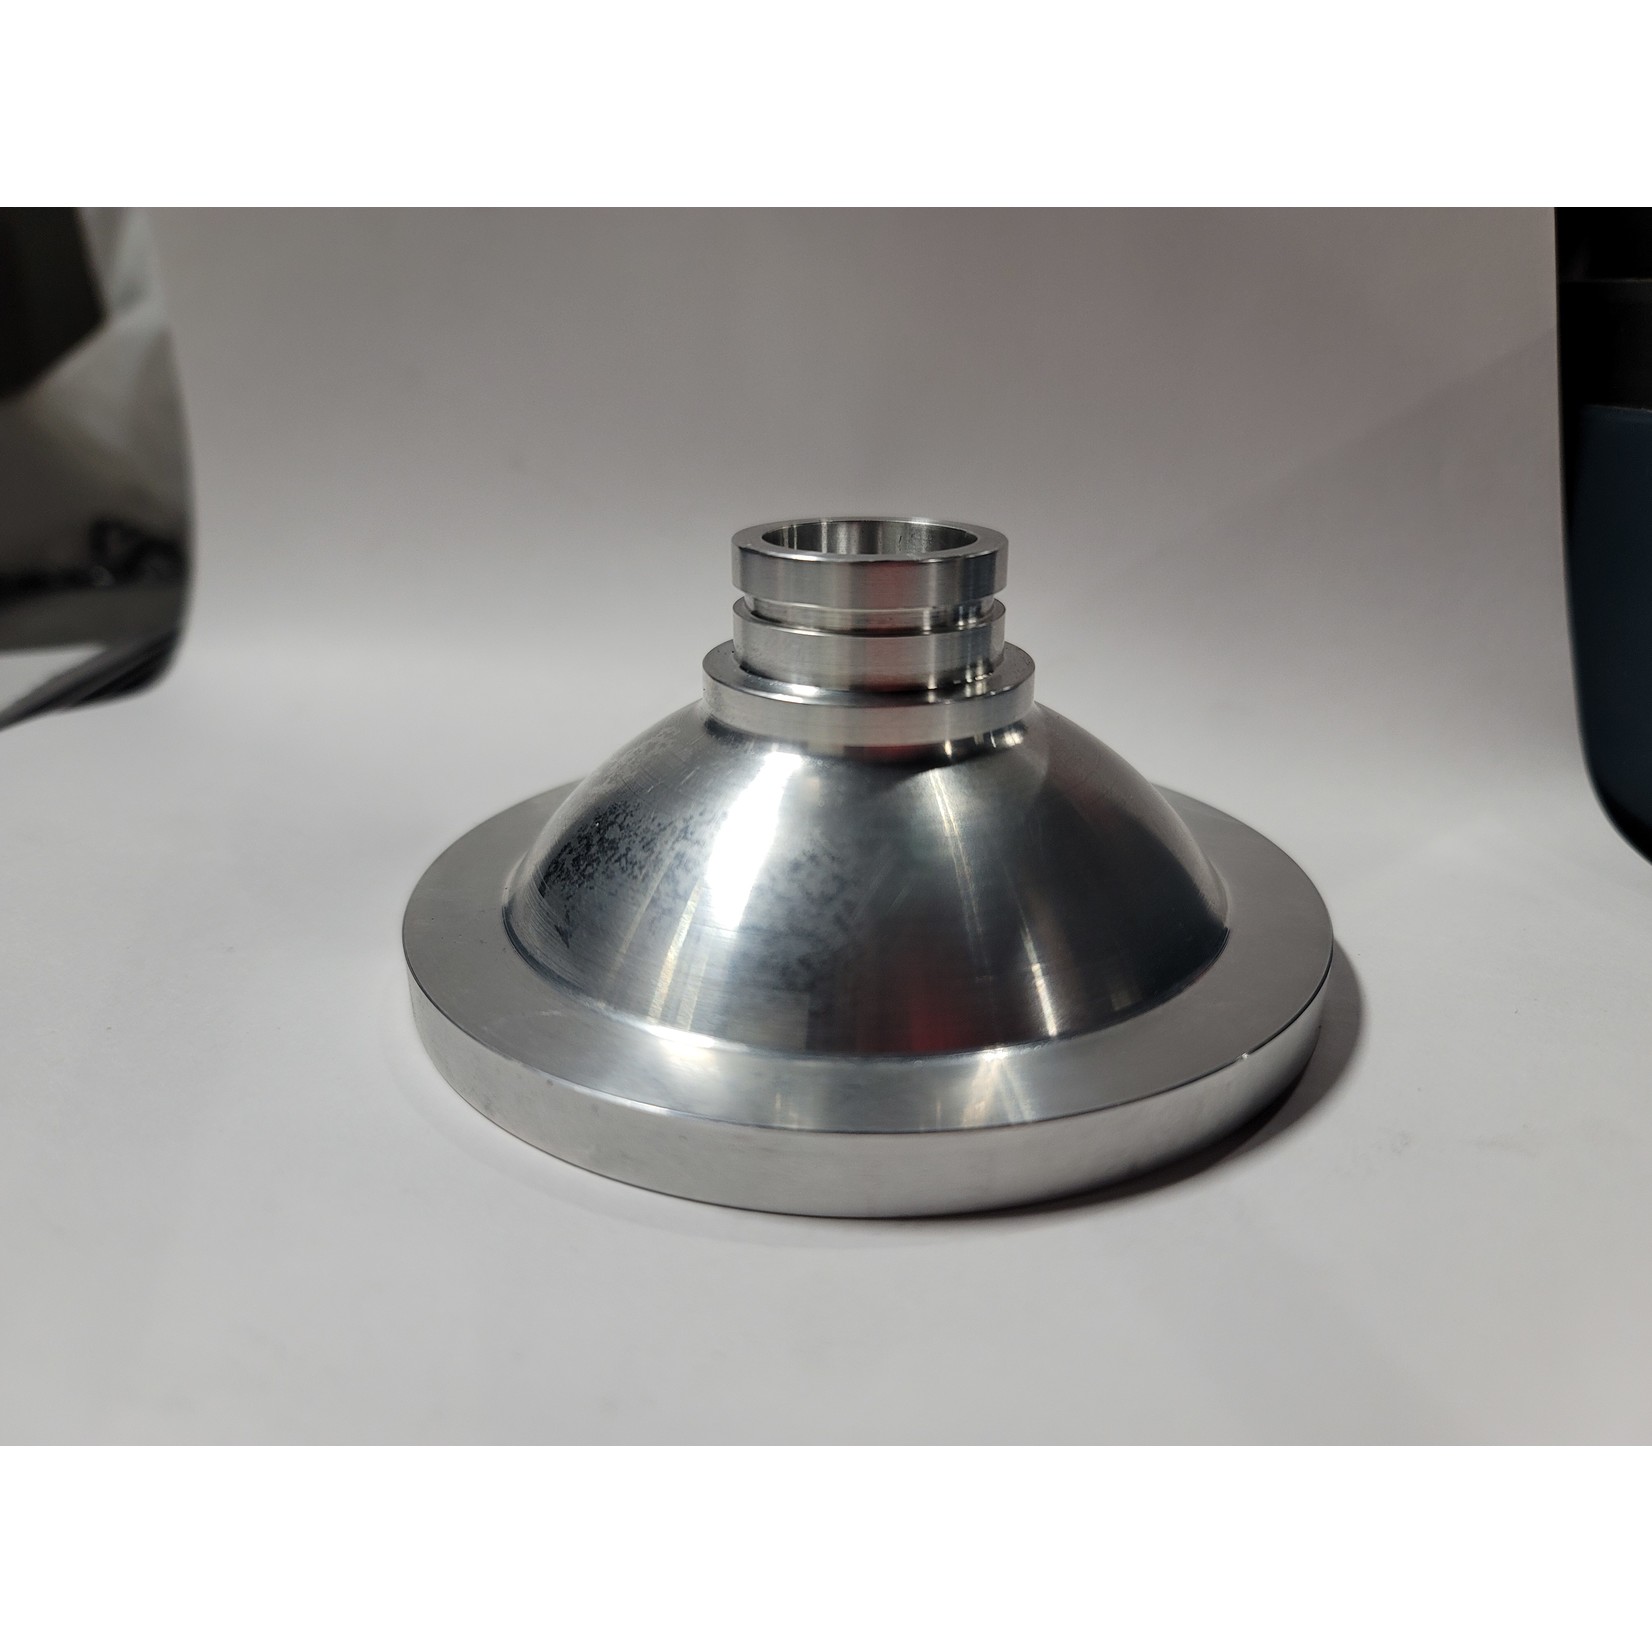 Compression Dome for xc700 non ves, pump gas,These are available by order only. We are not currently stocking inventory.